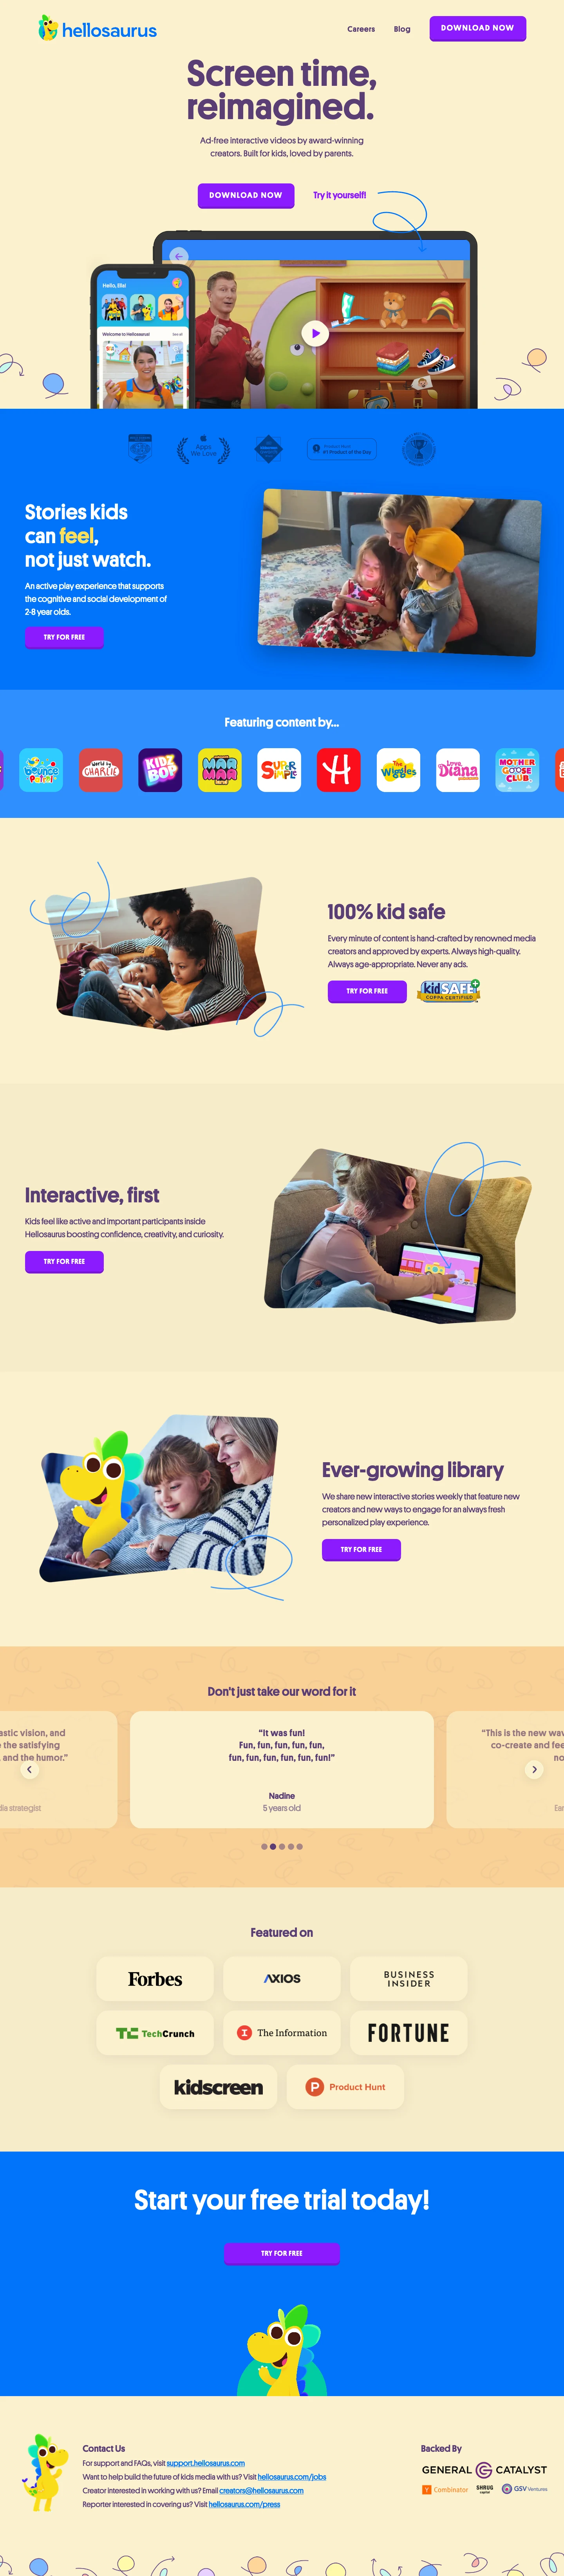 Hellosaurus Landing Page Example: Screen time, reimagined. Ad-free interactive videos by award-winning creators. Built for kids, loved by parents.